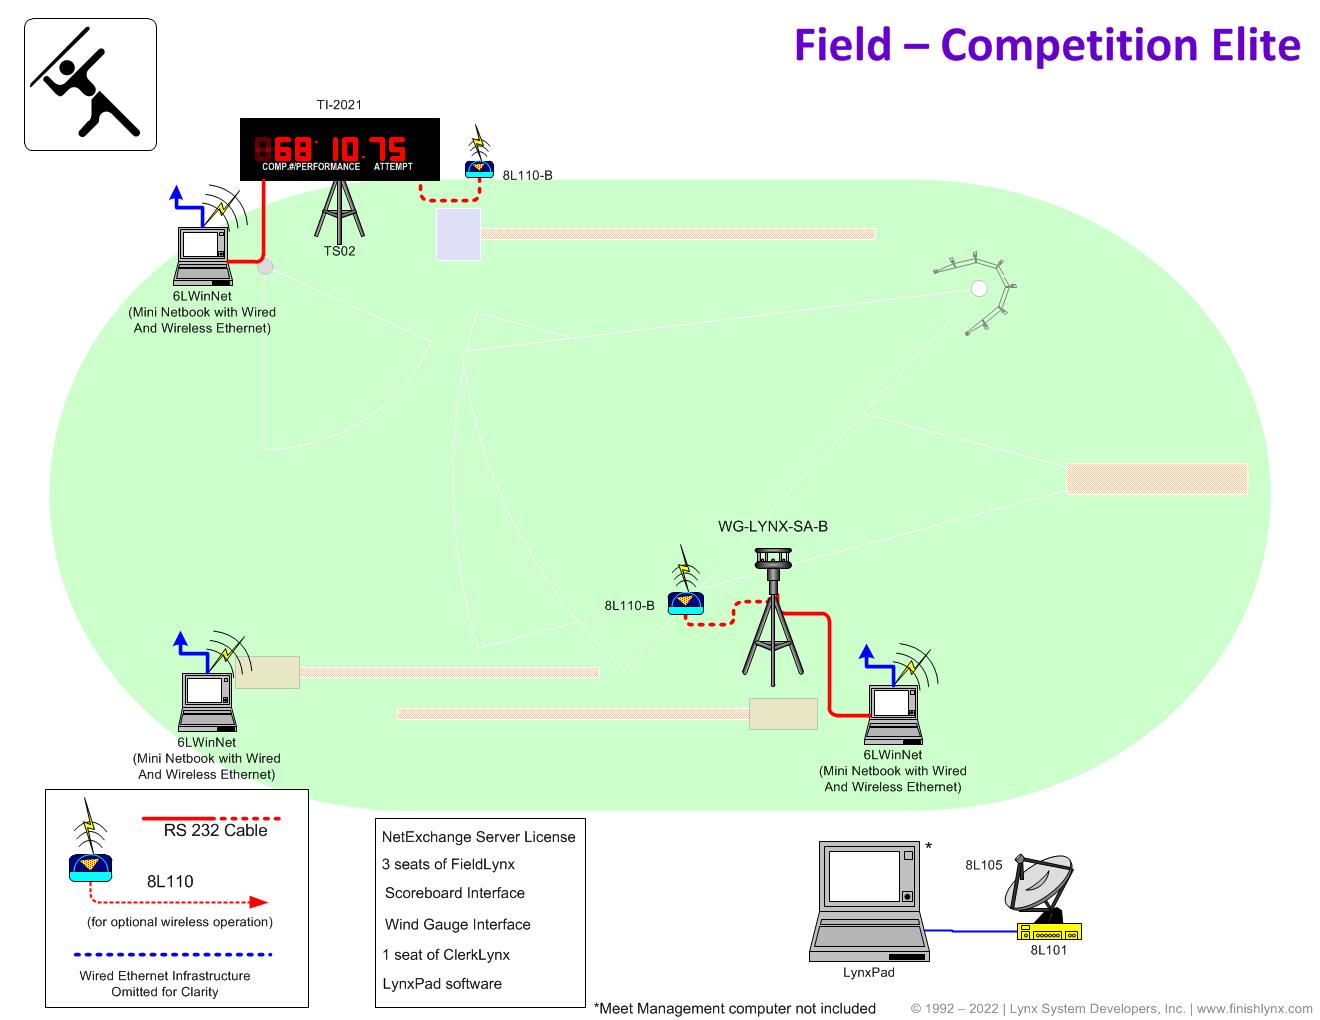 Field - Competition Elite